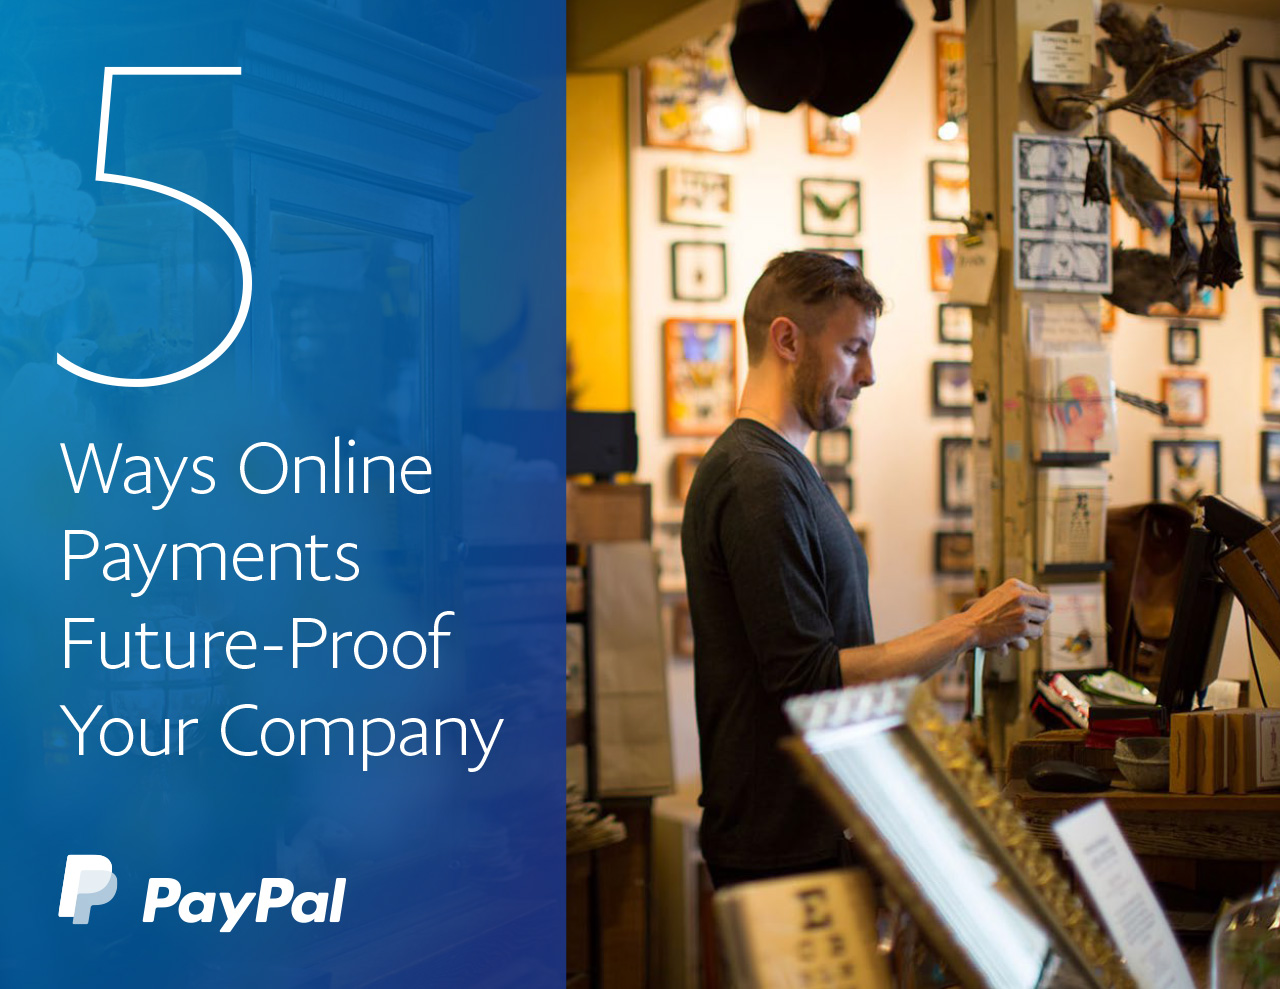 5 Ways Online Payments Future-Proof Your Company